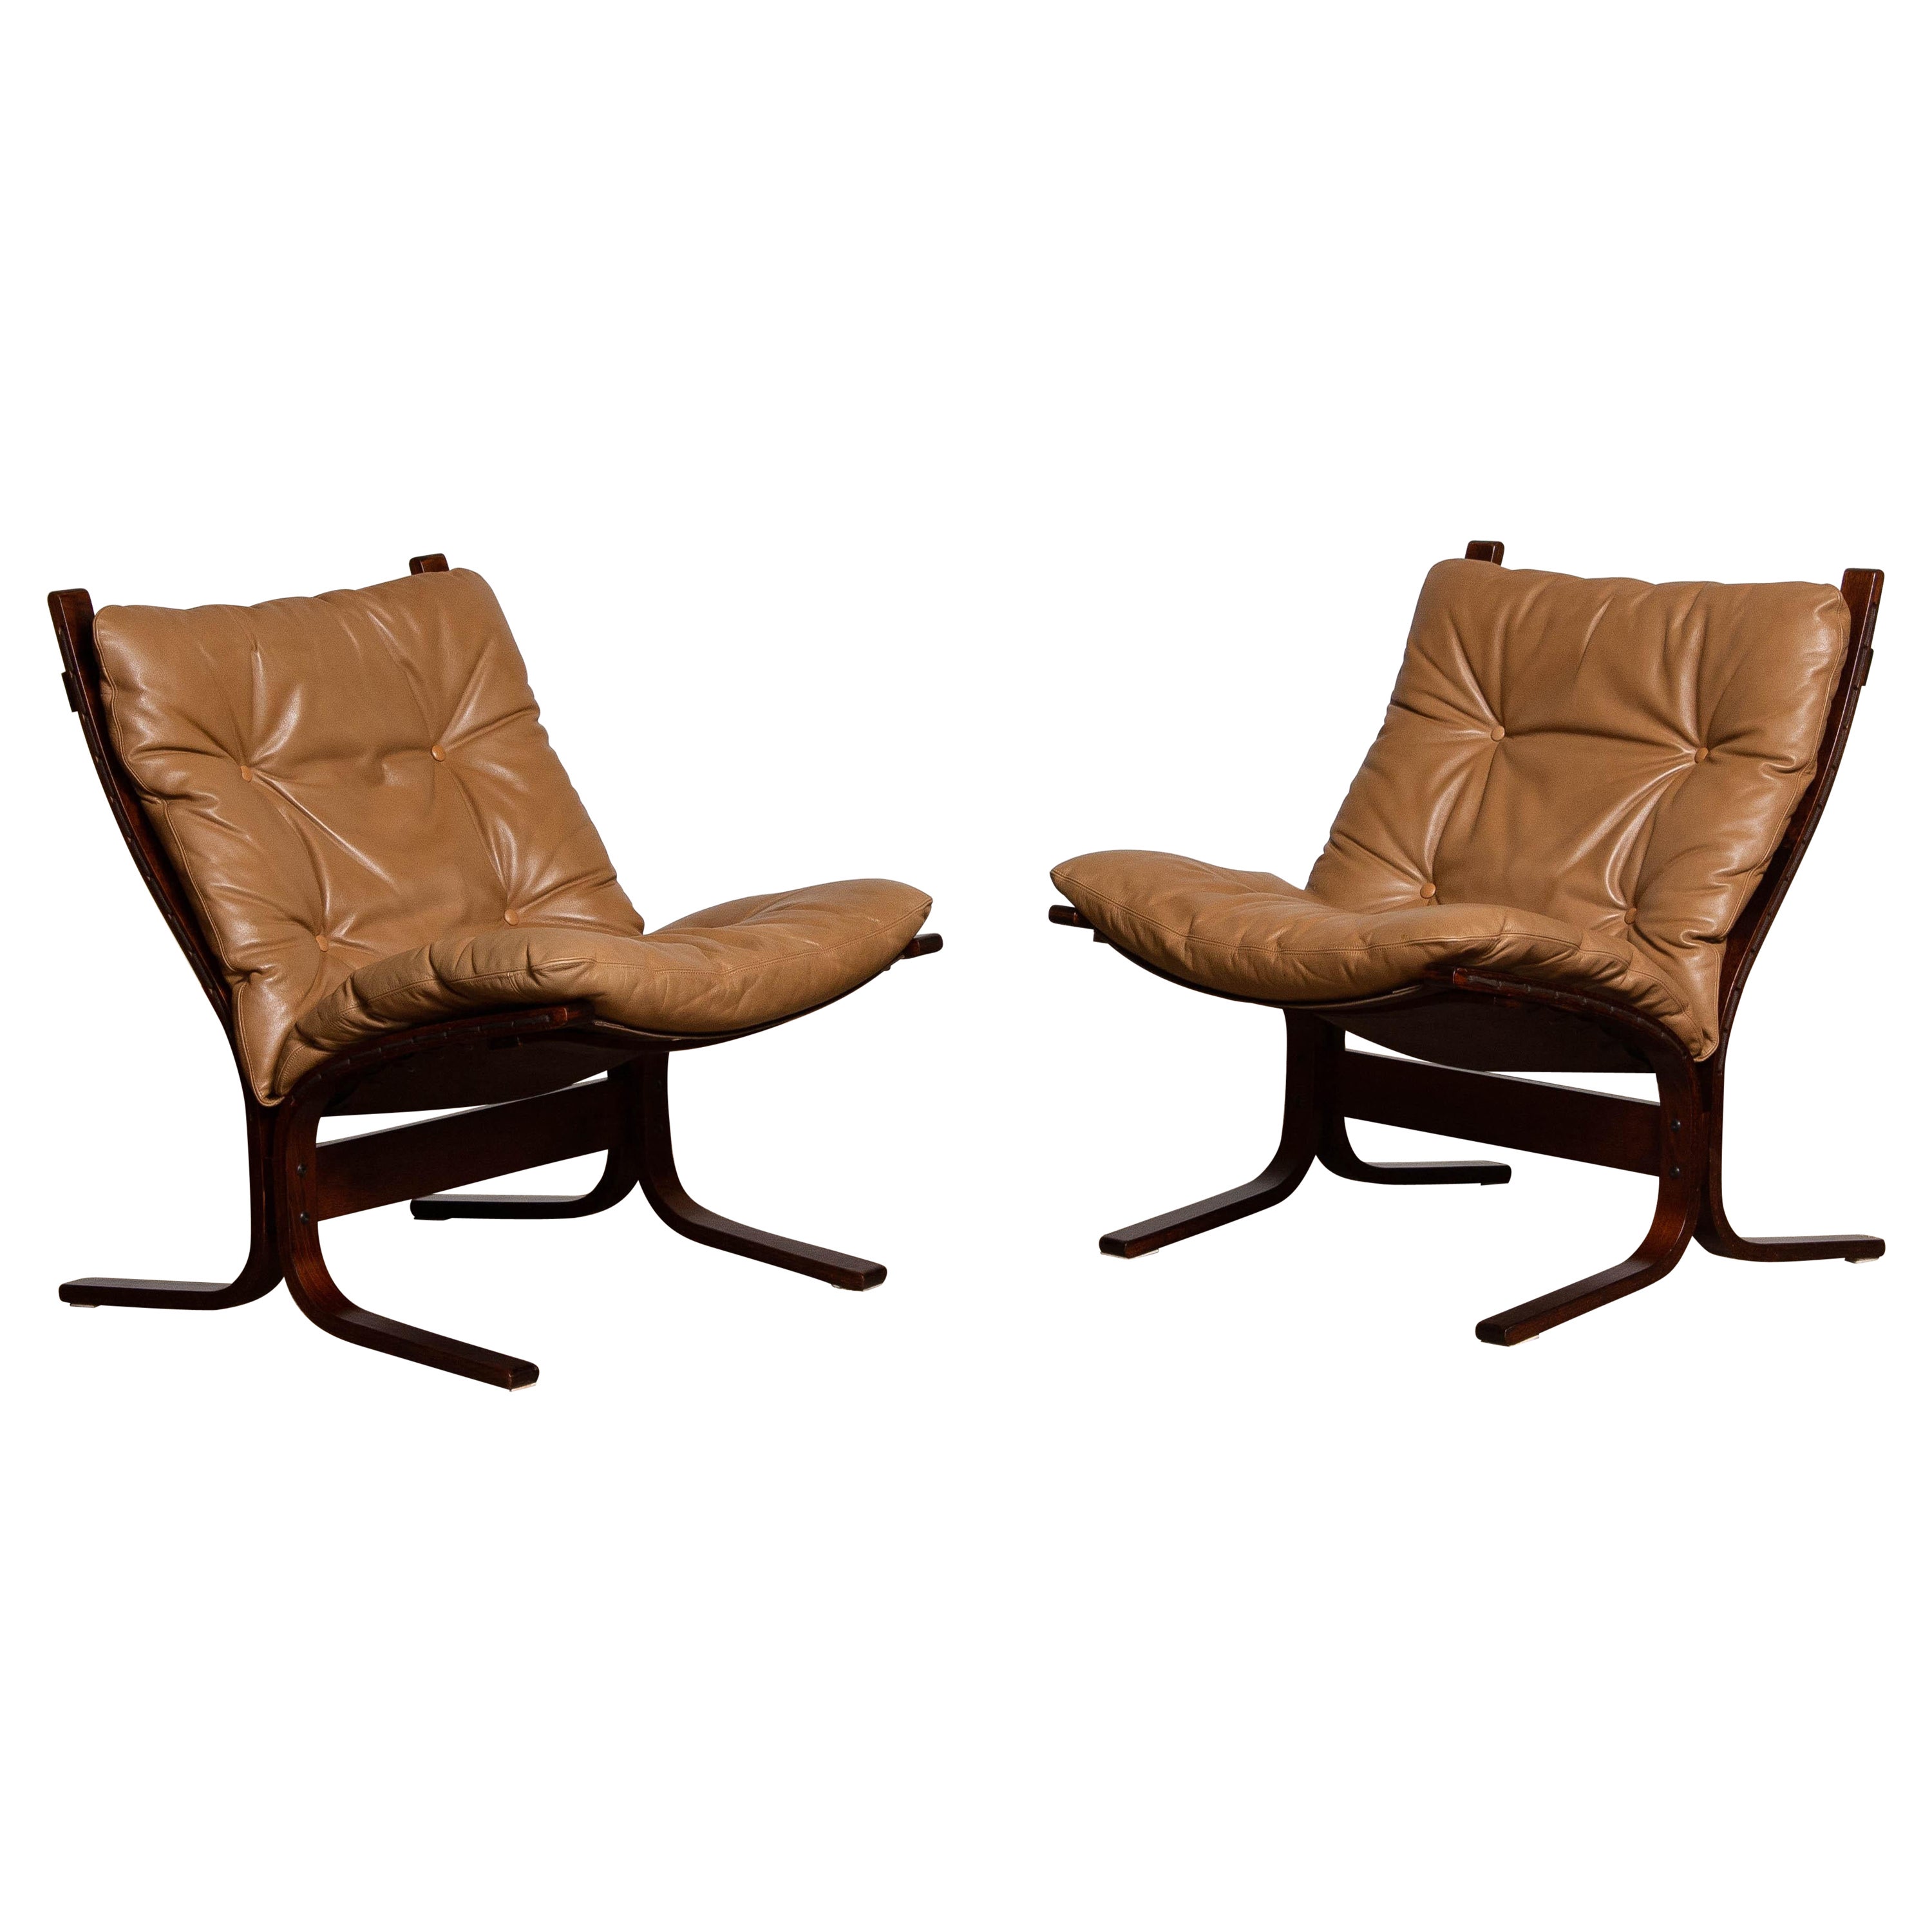 1970s Pair Camel Leather 'Siësta' Lounge Chairs by Ingmar Relling for Westnofa